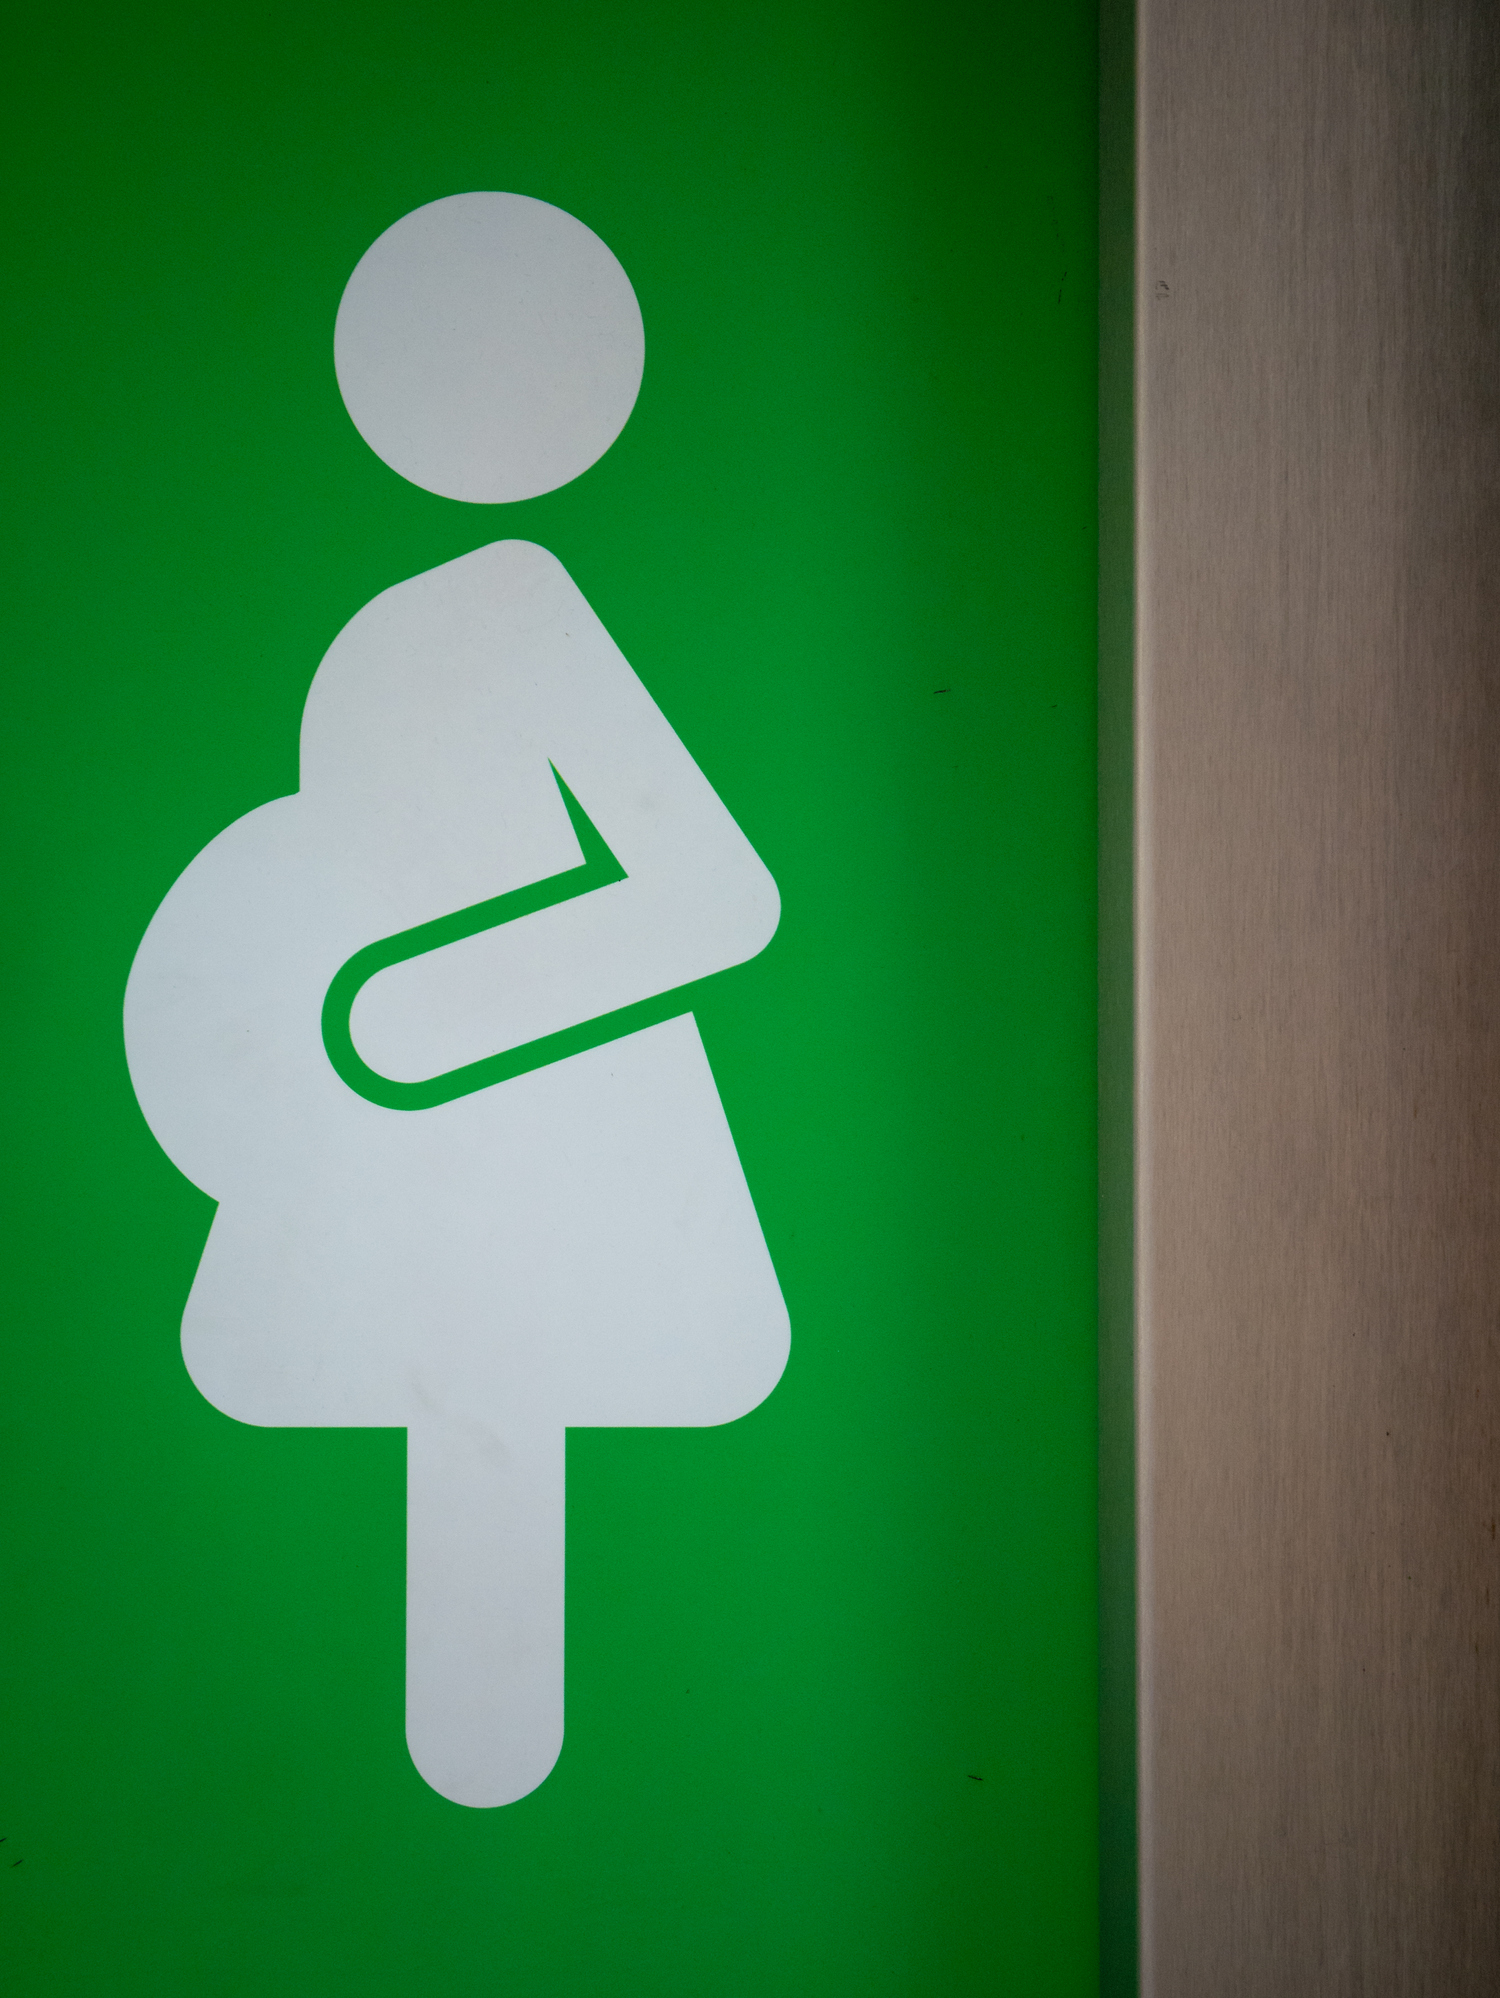 Pregnancy symbol on a restroom sign indicating a facility for expecting mothers